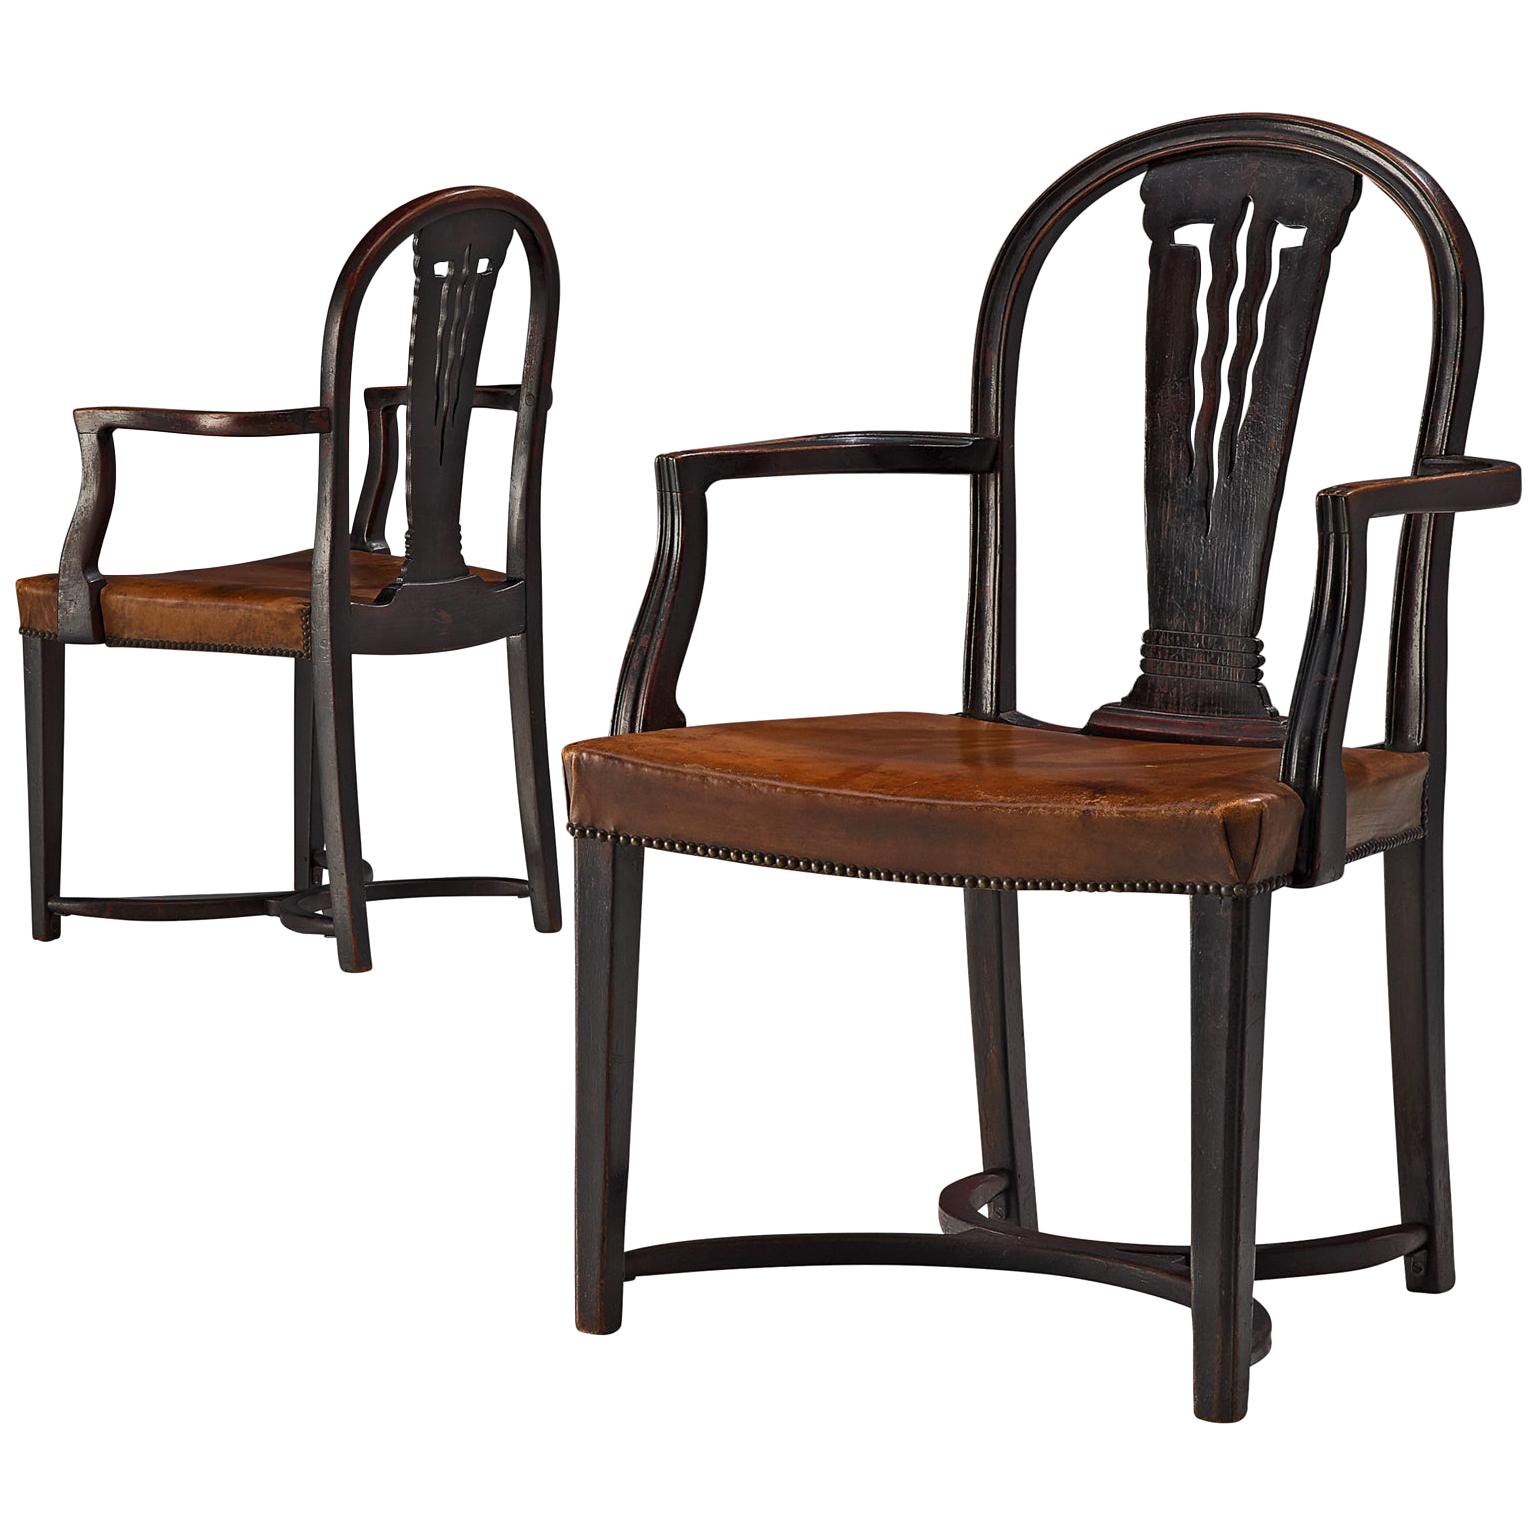 Pair of Early Art Deco Thonet Armchairs, 1920s